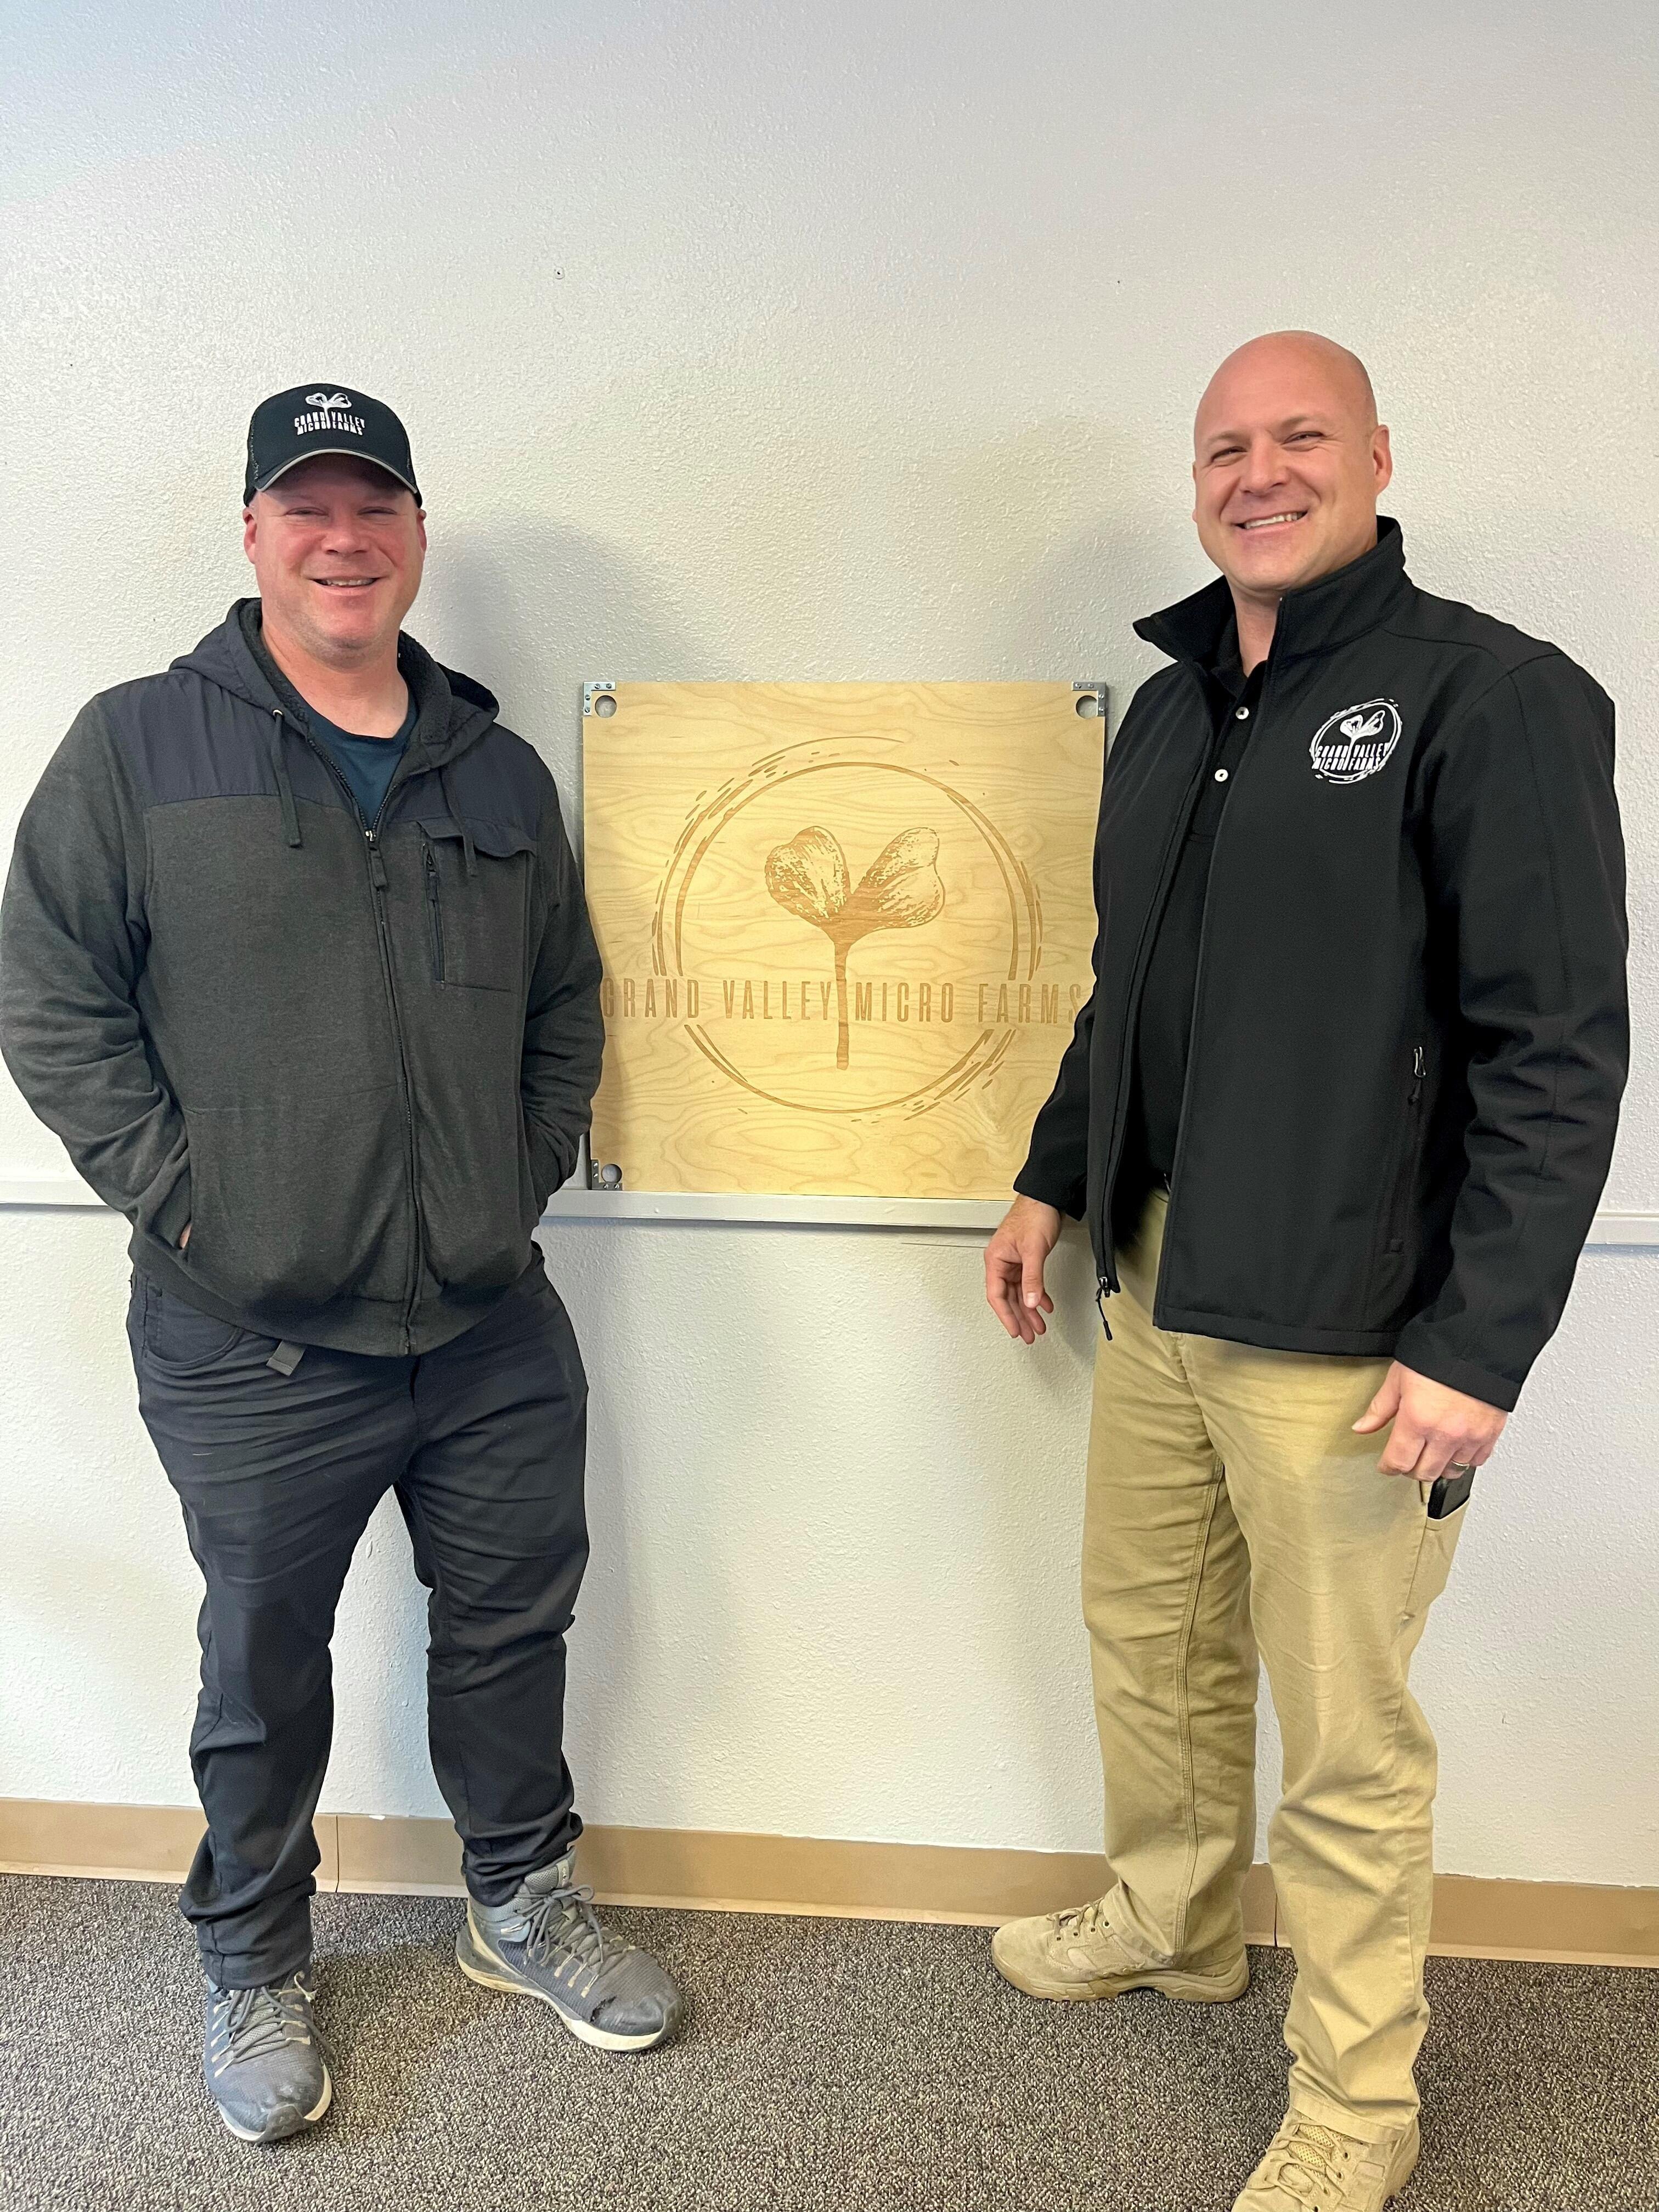 Image of Nate and Phil Strouse. They are brothers who are co-owners of Grand Valley Micro Farms. They are standing in the photo and in the middle is a wooden square of their logo. The logo is a circle with their company name in the middle and a plant growing in the middle. 